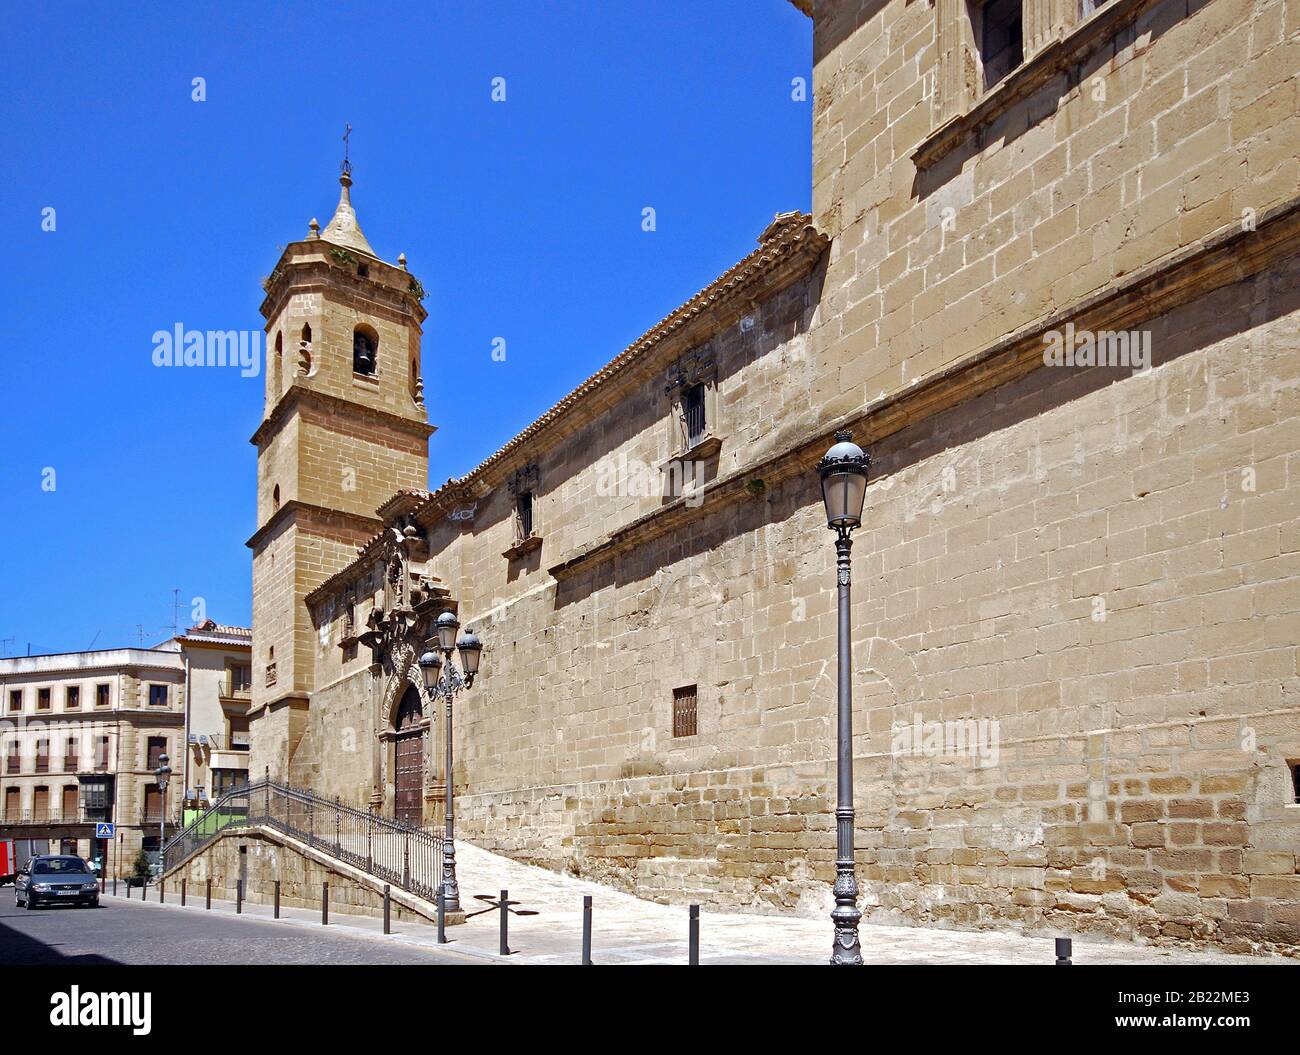 View of the Holy Trinity church and convent, Ubeda, Spain. Stock Photo